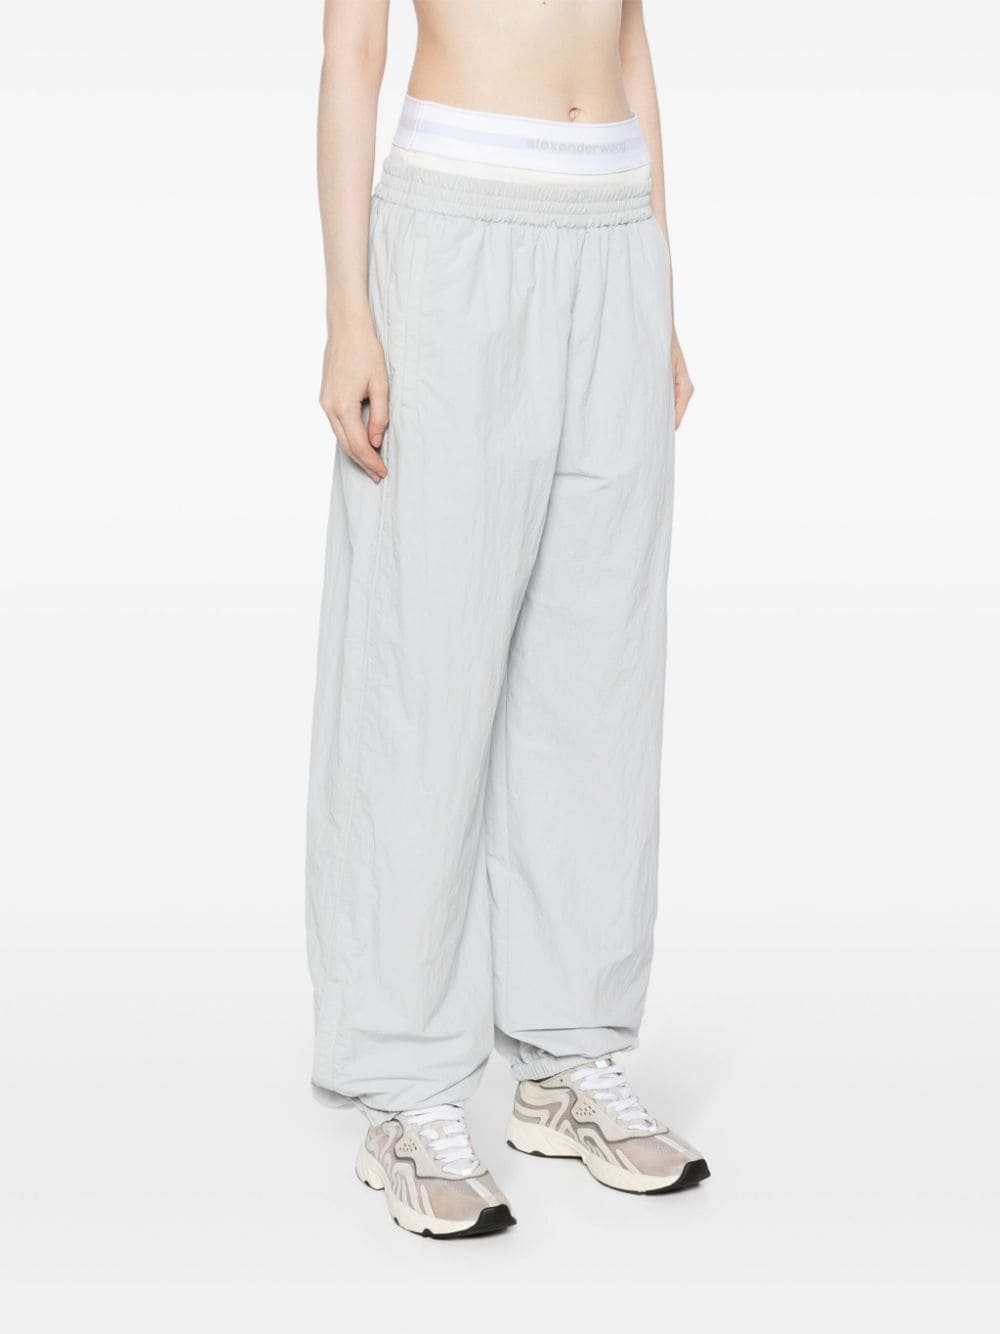 ALEXANDER WANG Light Grey Track Pants with Pre-Styled Underwear for Women